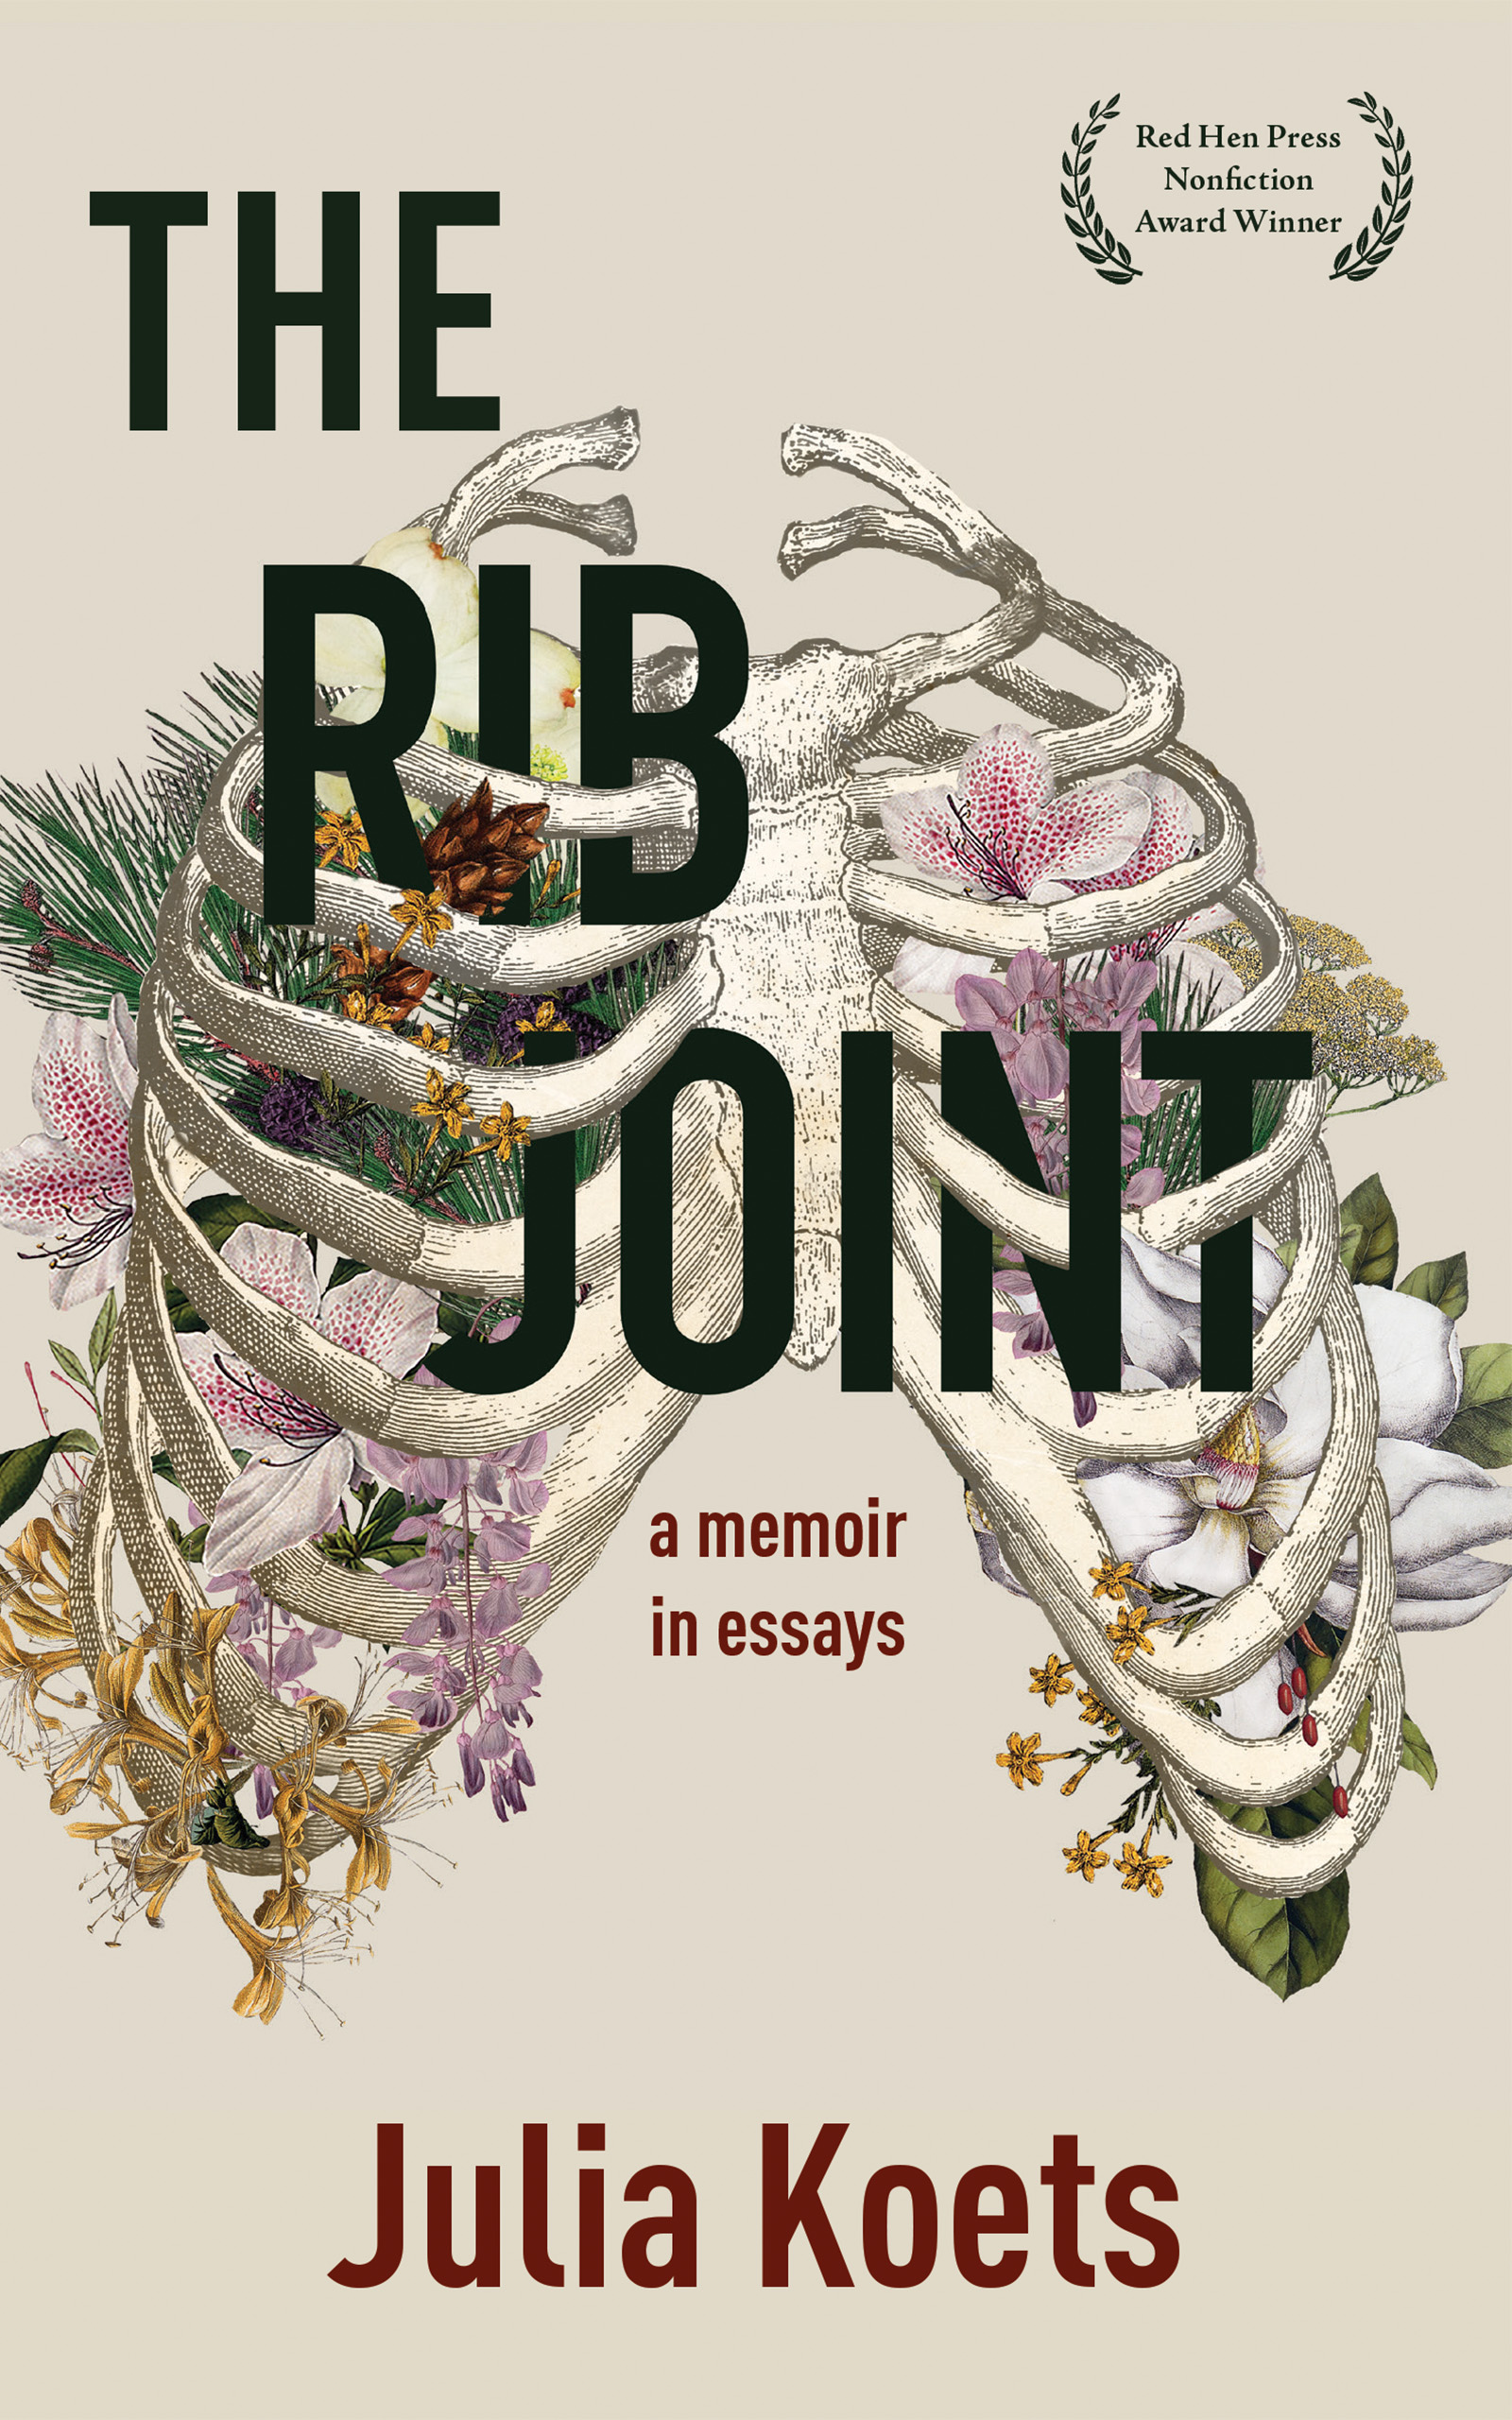 A cream background with a graphic design in the center of ribs with flowers growing inside and black script that reads The Rib Joint a memoir in essays by Julia Koets.